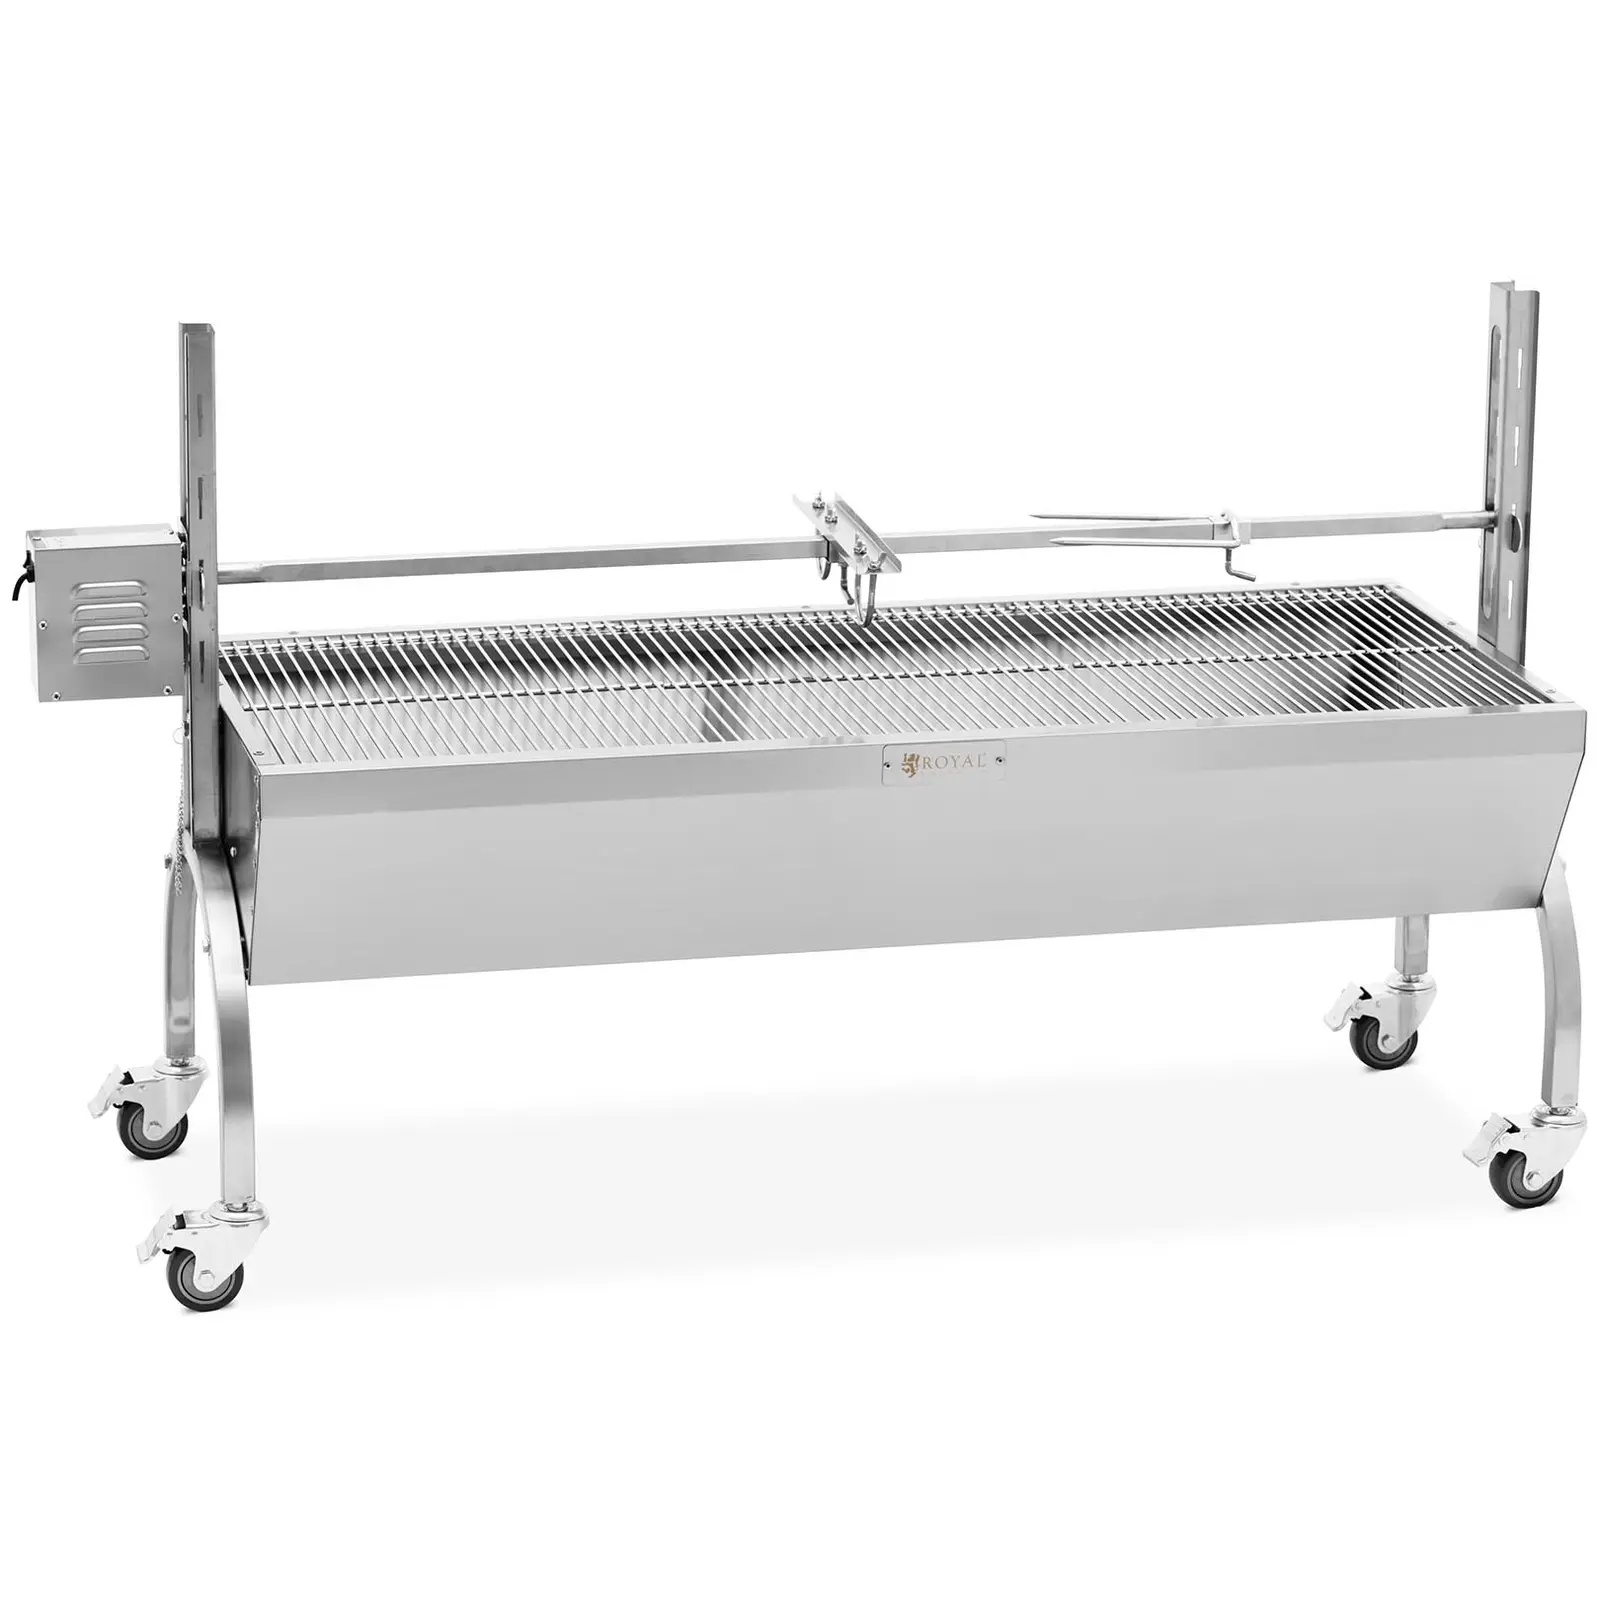 Roasting Spit - with motor - 40 kg - stainless steel - grill spit length: 137 cm